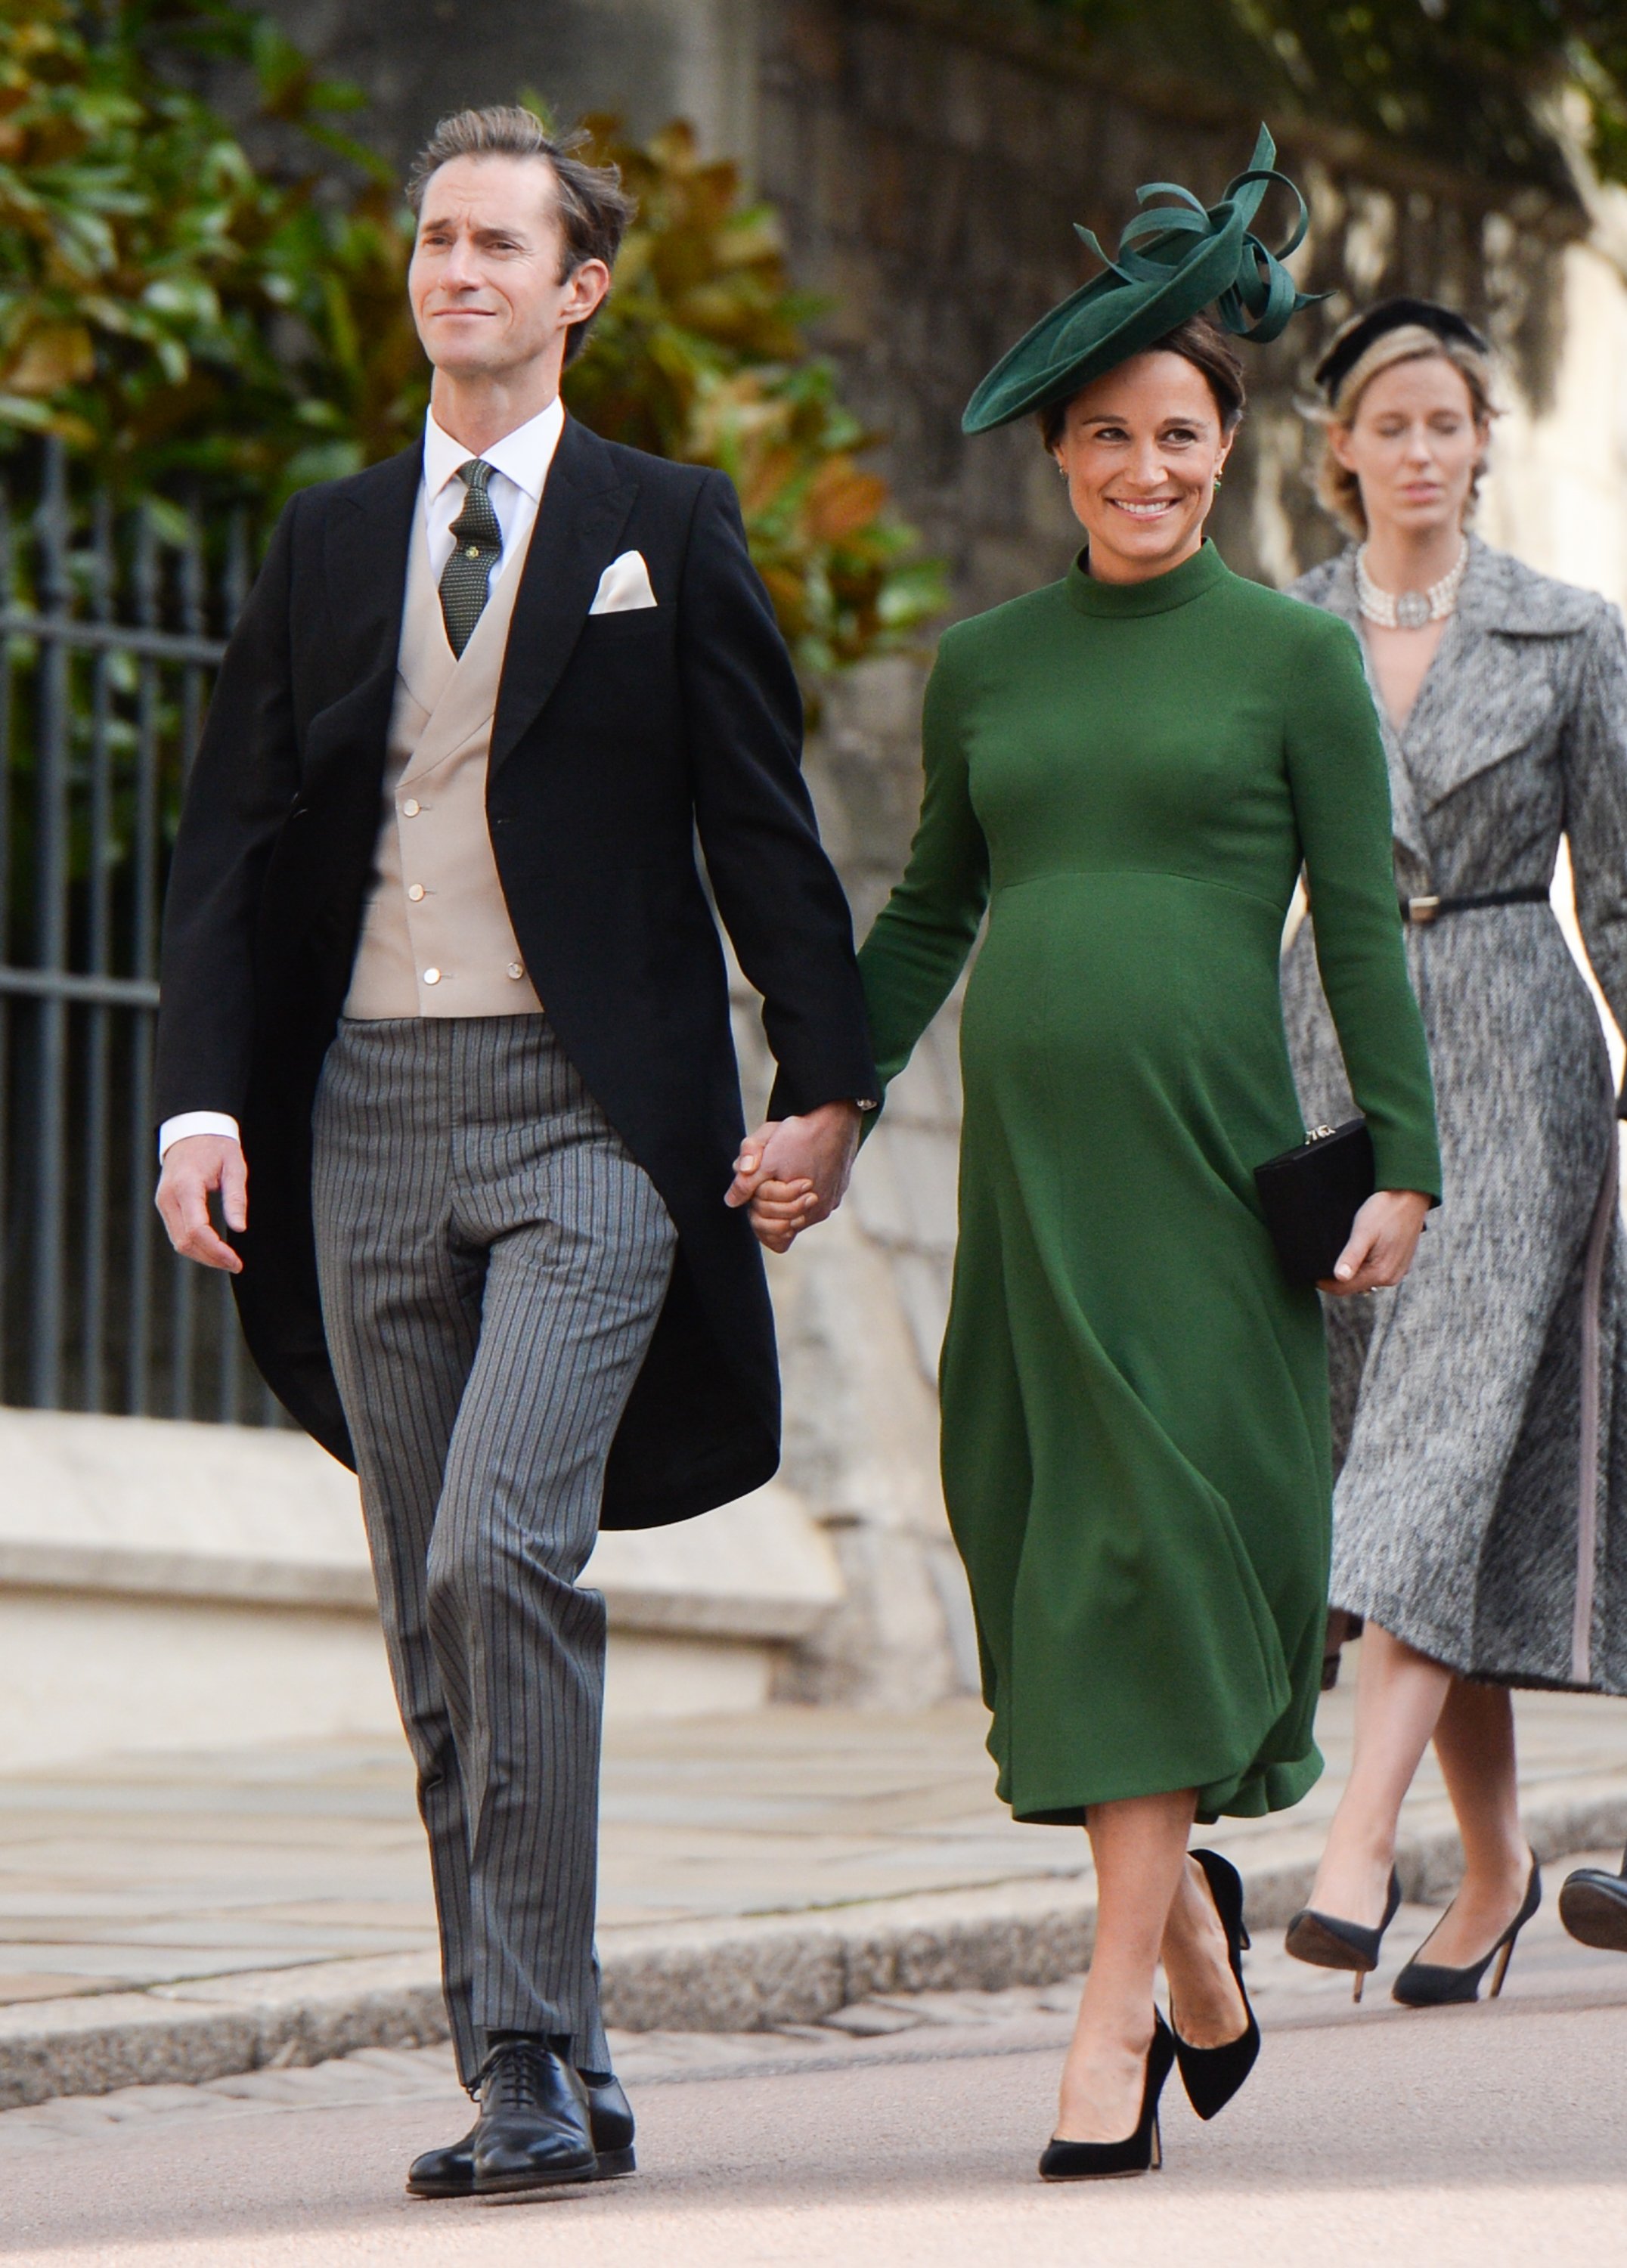 James Matthews and Pippa Middleton at the wedding of Princess Eugenie of York and Jack Brooksbank at St George's Chapel in Windsor Castle on October 12, 2018 in Windsor, England. | Source: Getty Images